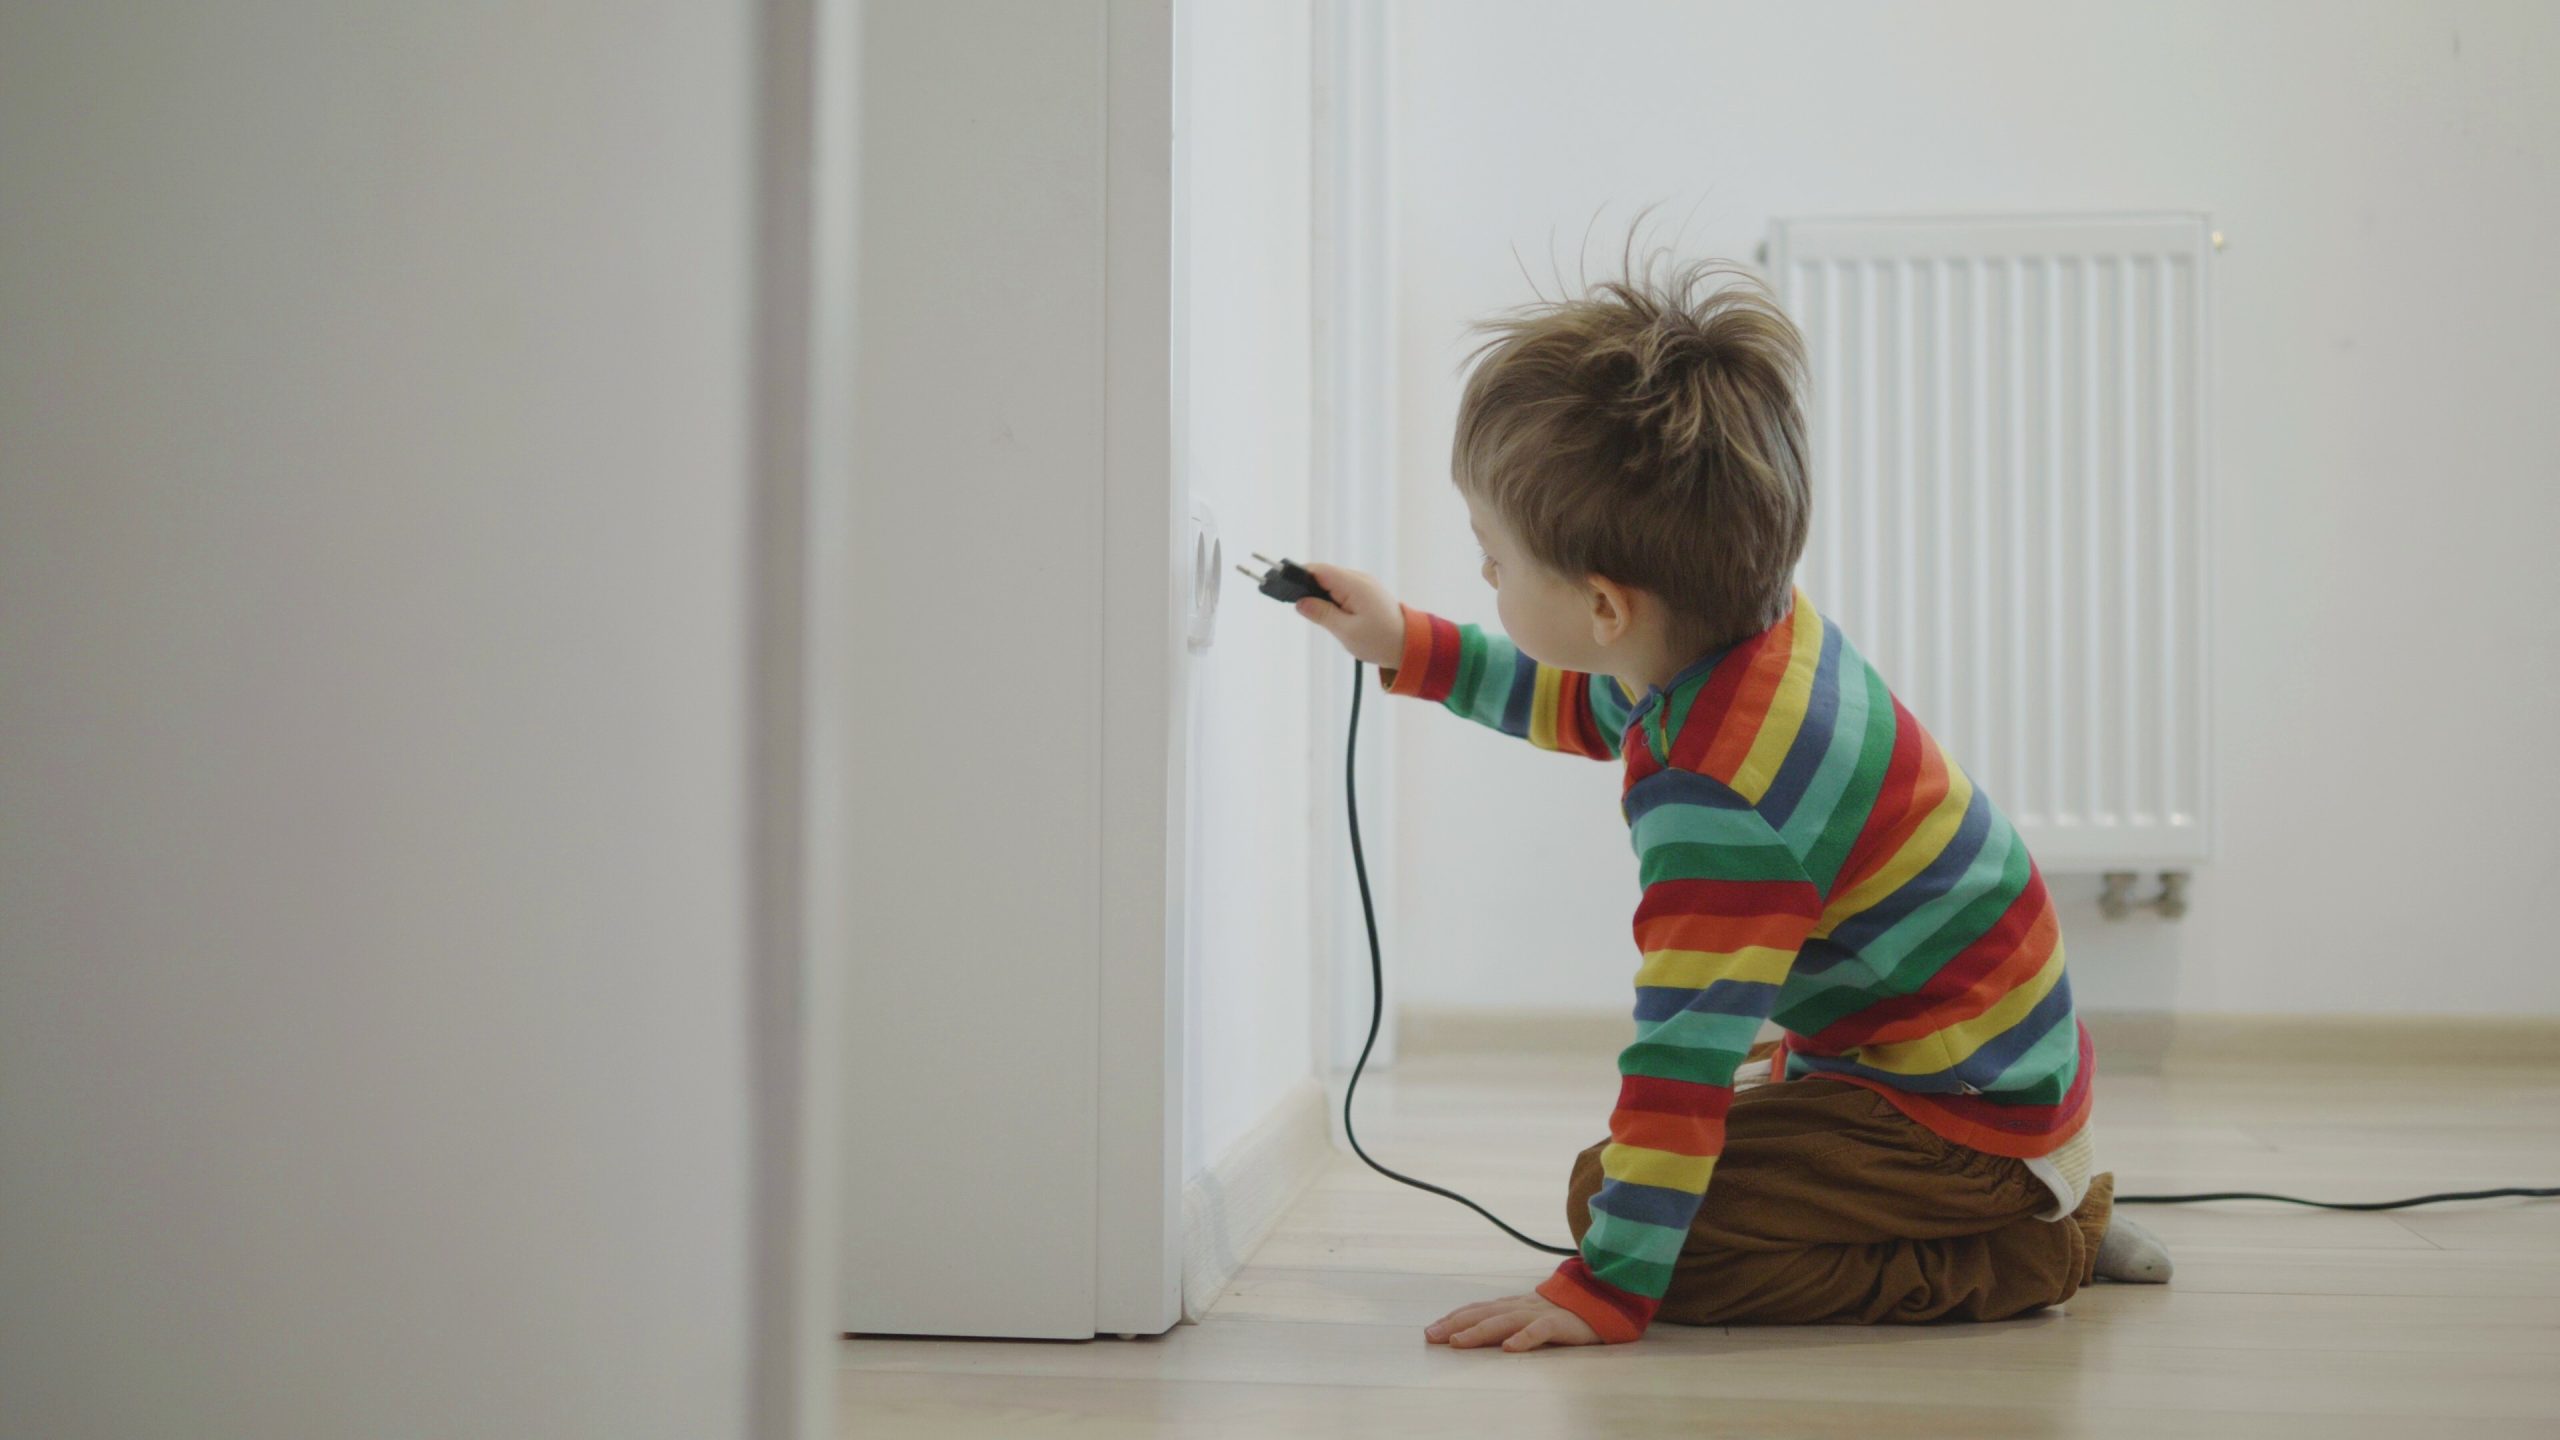 Ensuring Child Safety with Tamper Resistant Devices: A Must for Every Home - Picture of child near outlet holding plug